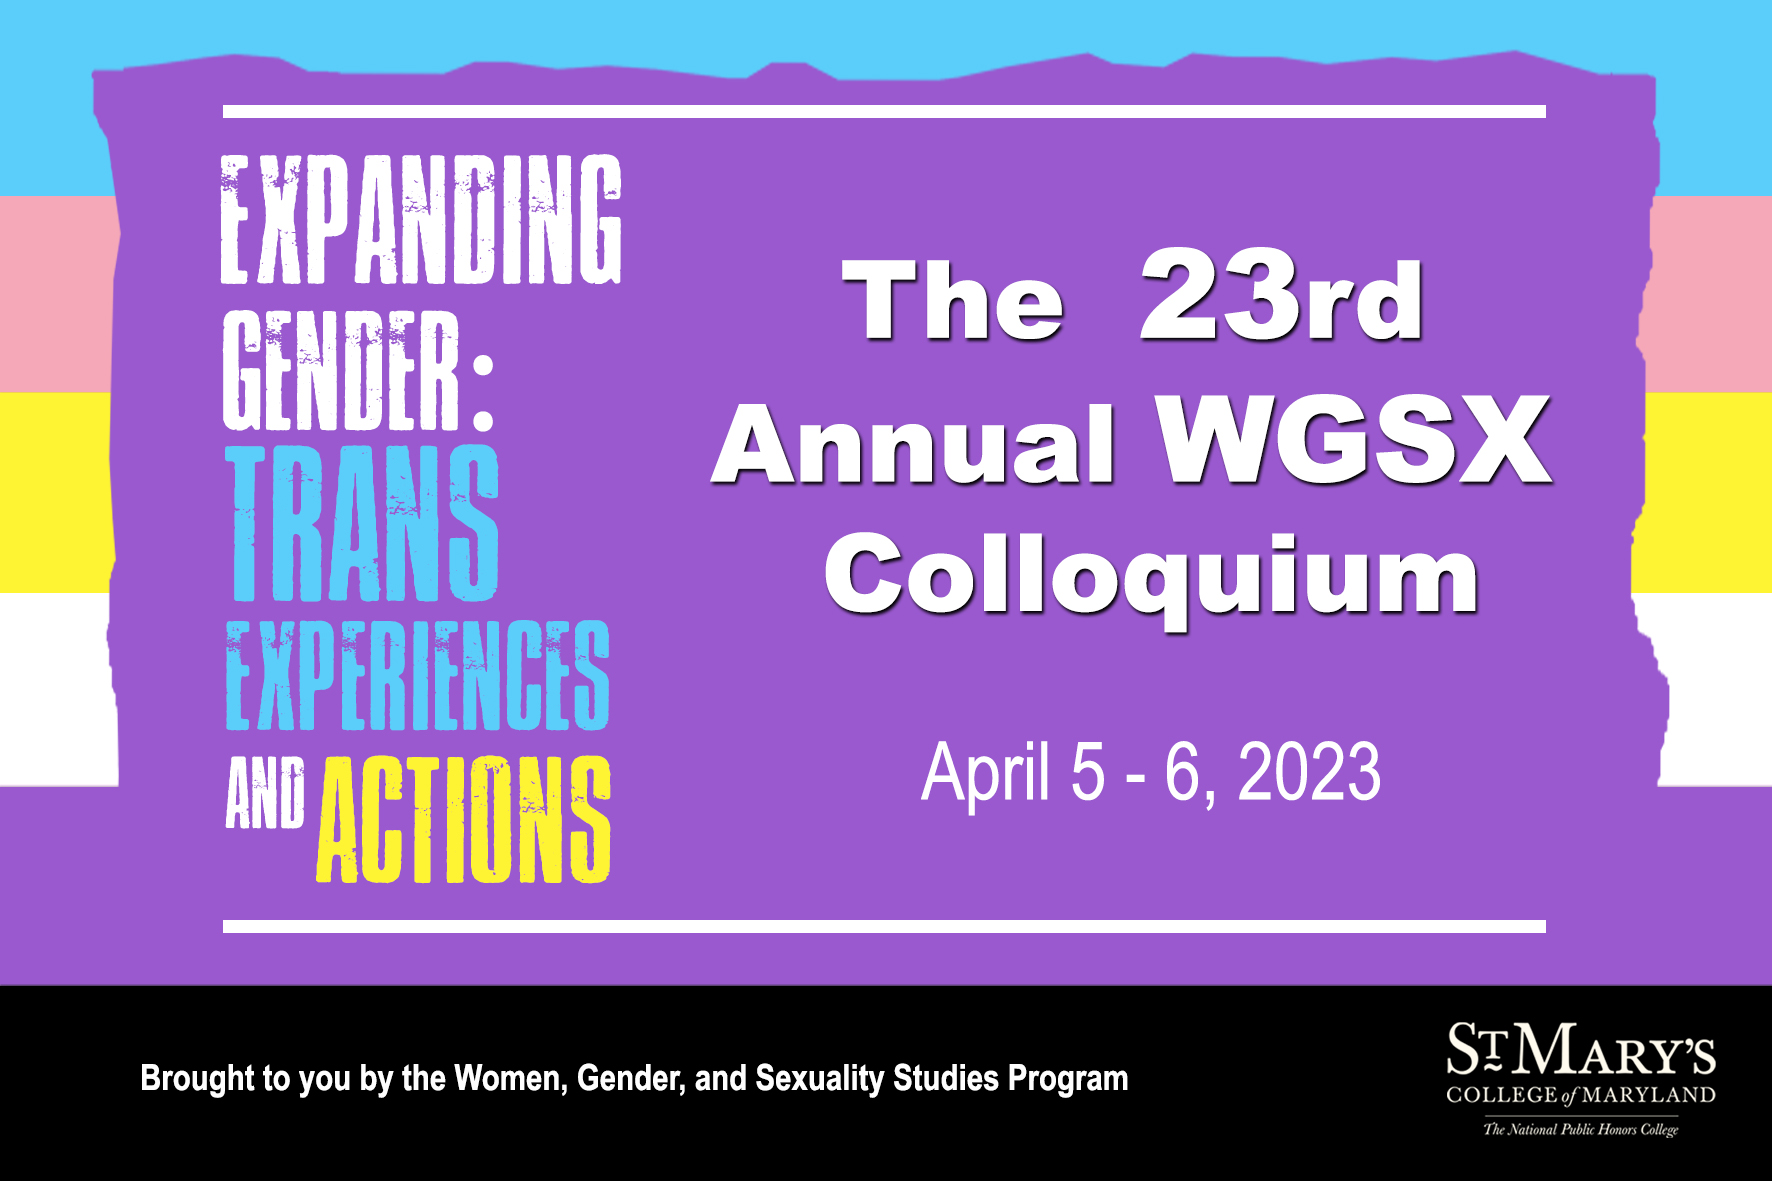 The 2023 Colloquium continues the program’s tradition of engaging with critical intellectual themes, this time focusing on transgender and gender non-conforming populations. 